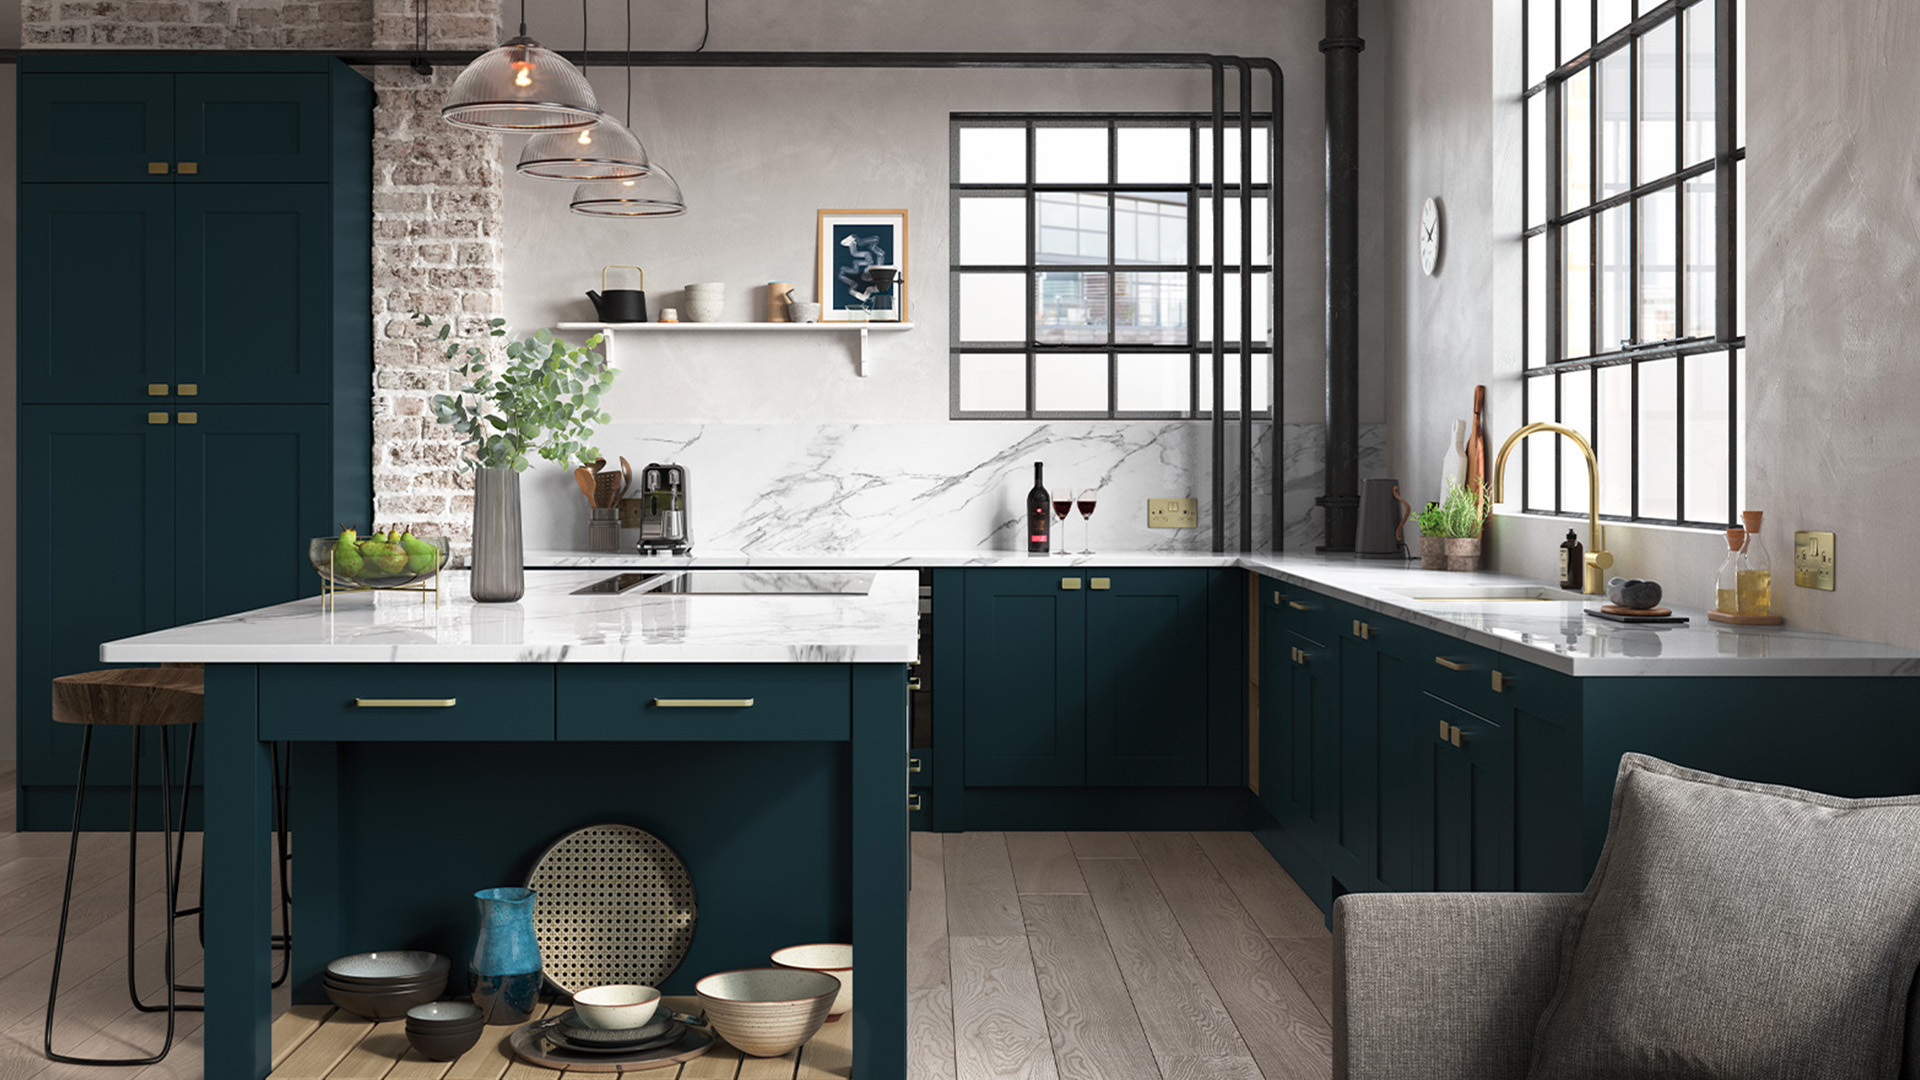 Georgia Marine Smooth Shaker kitchens blending traditional lines with a deep marine blue for a serene kitchen style